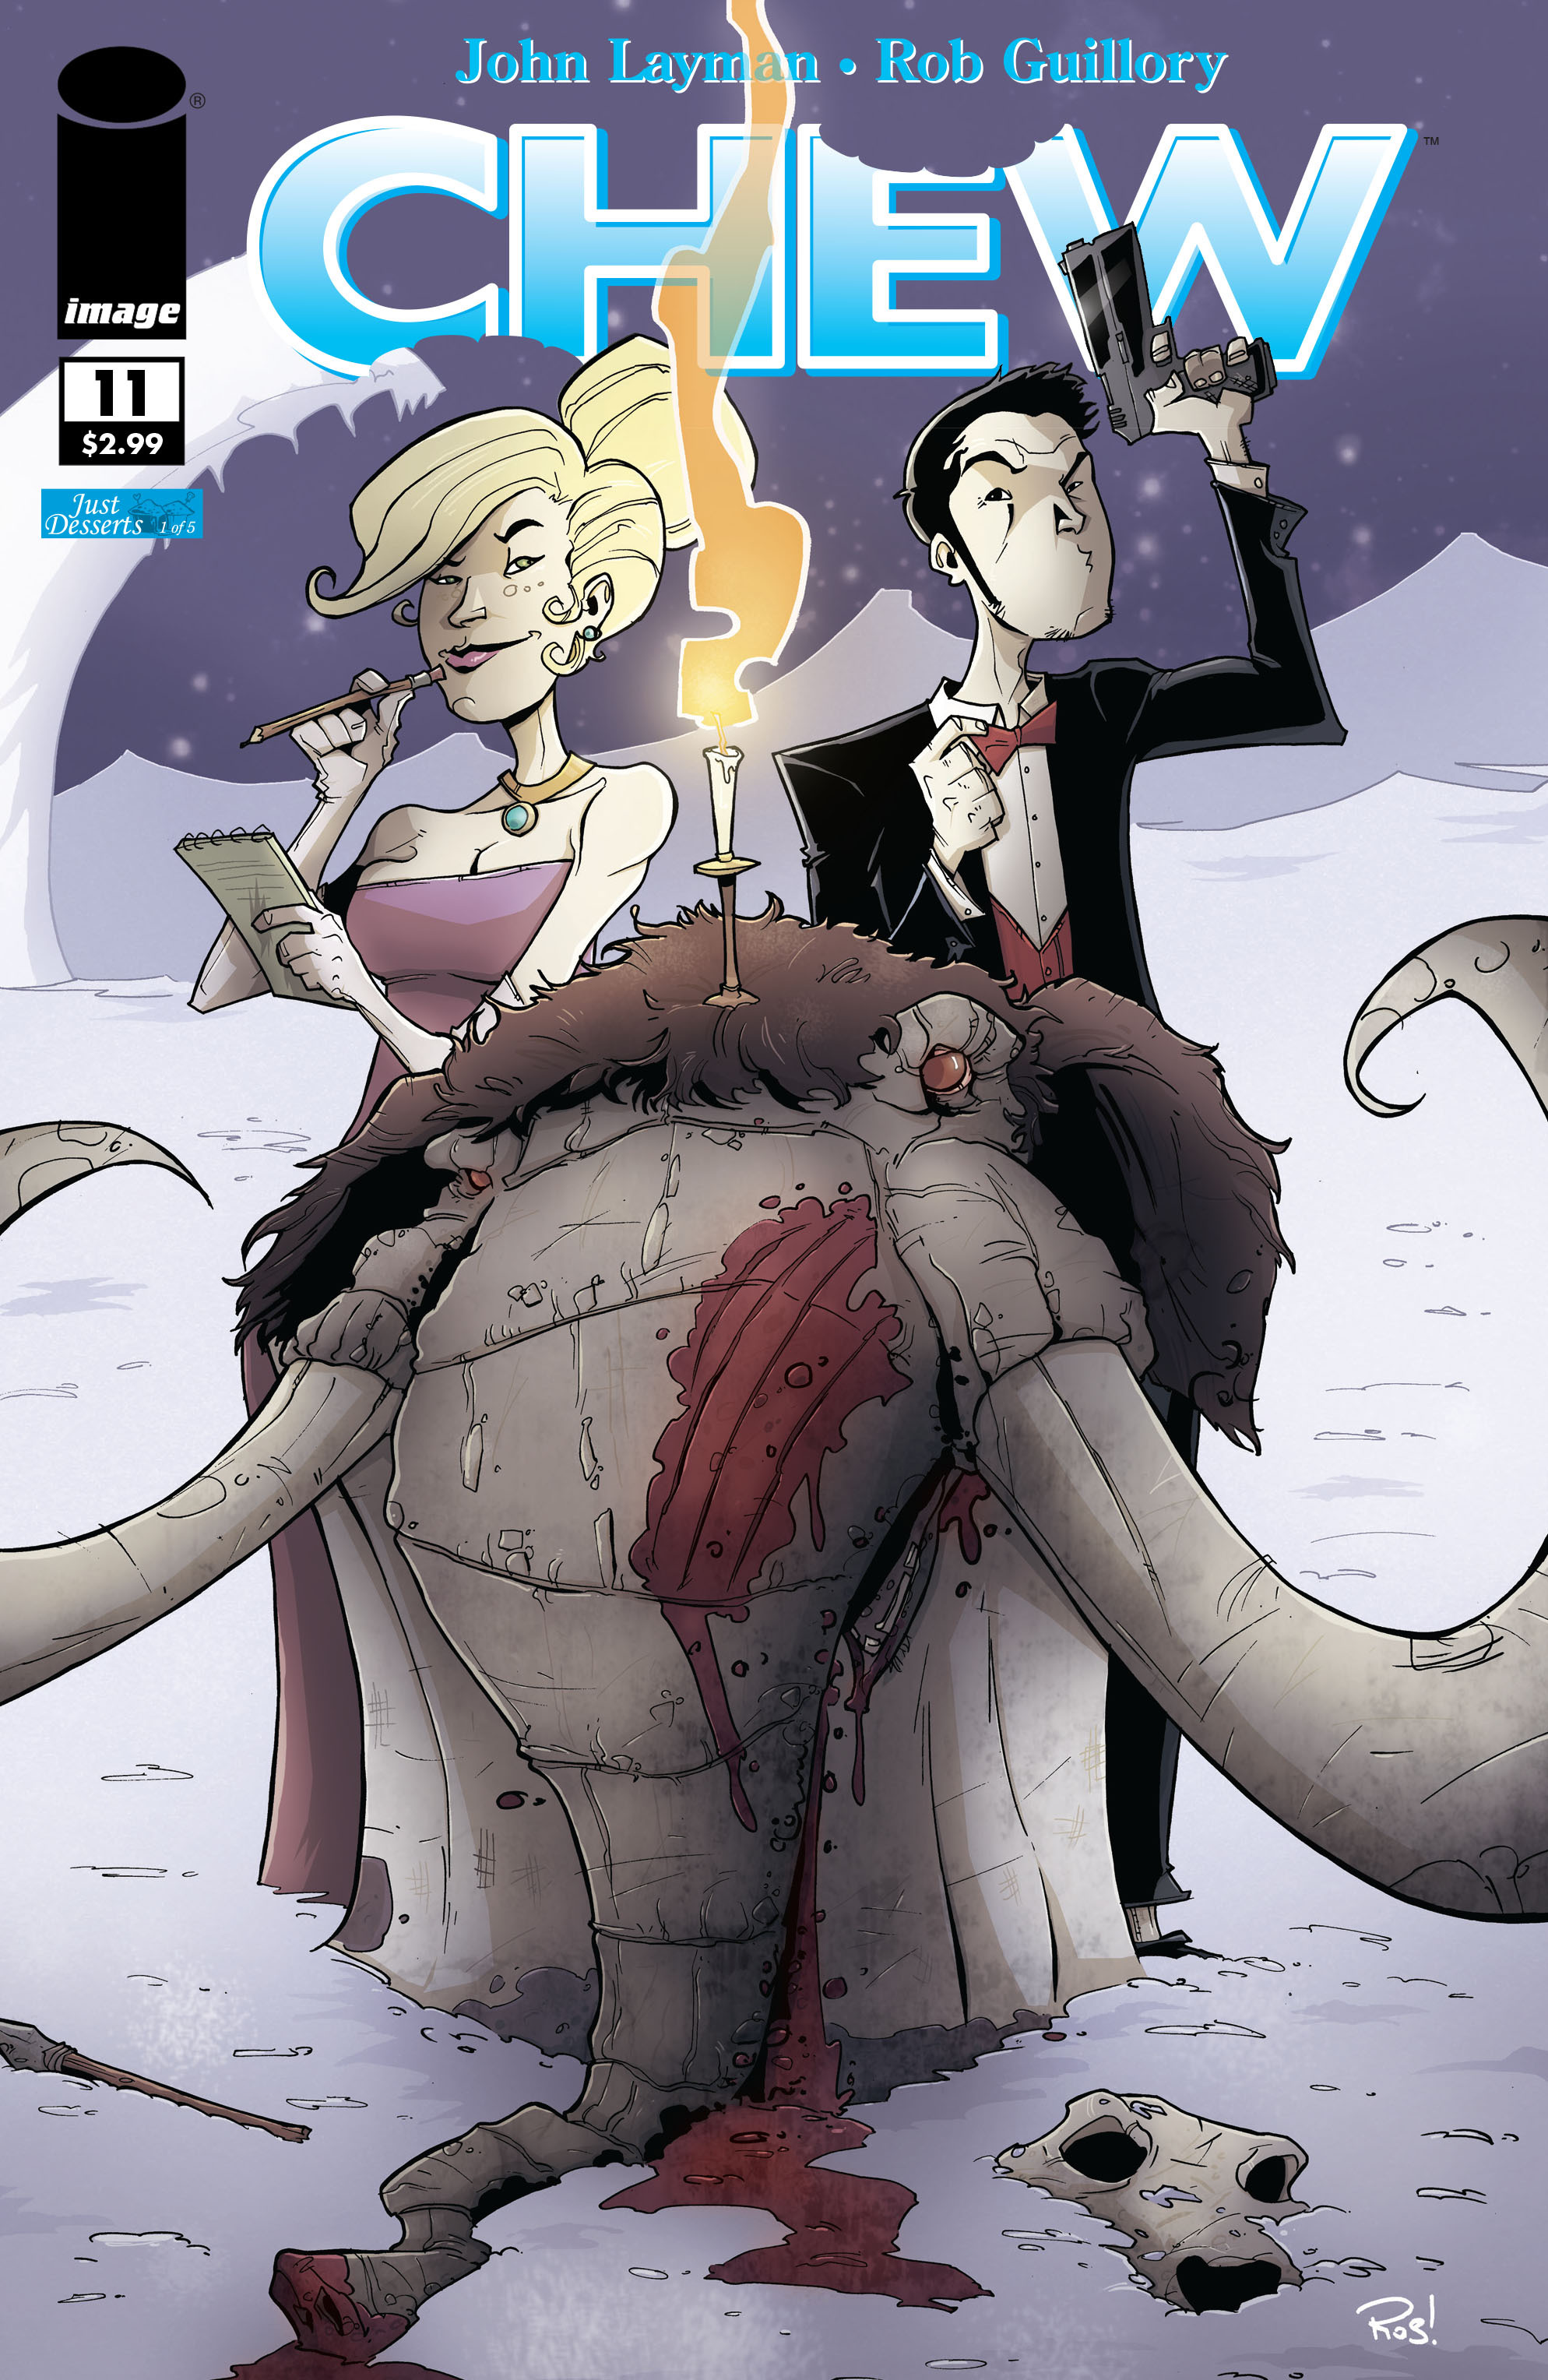 Read online Chew comic -  Issue #11 - 1